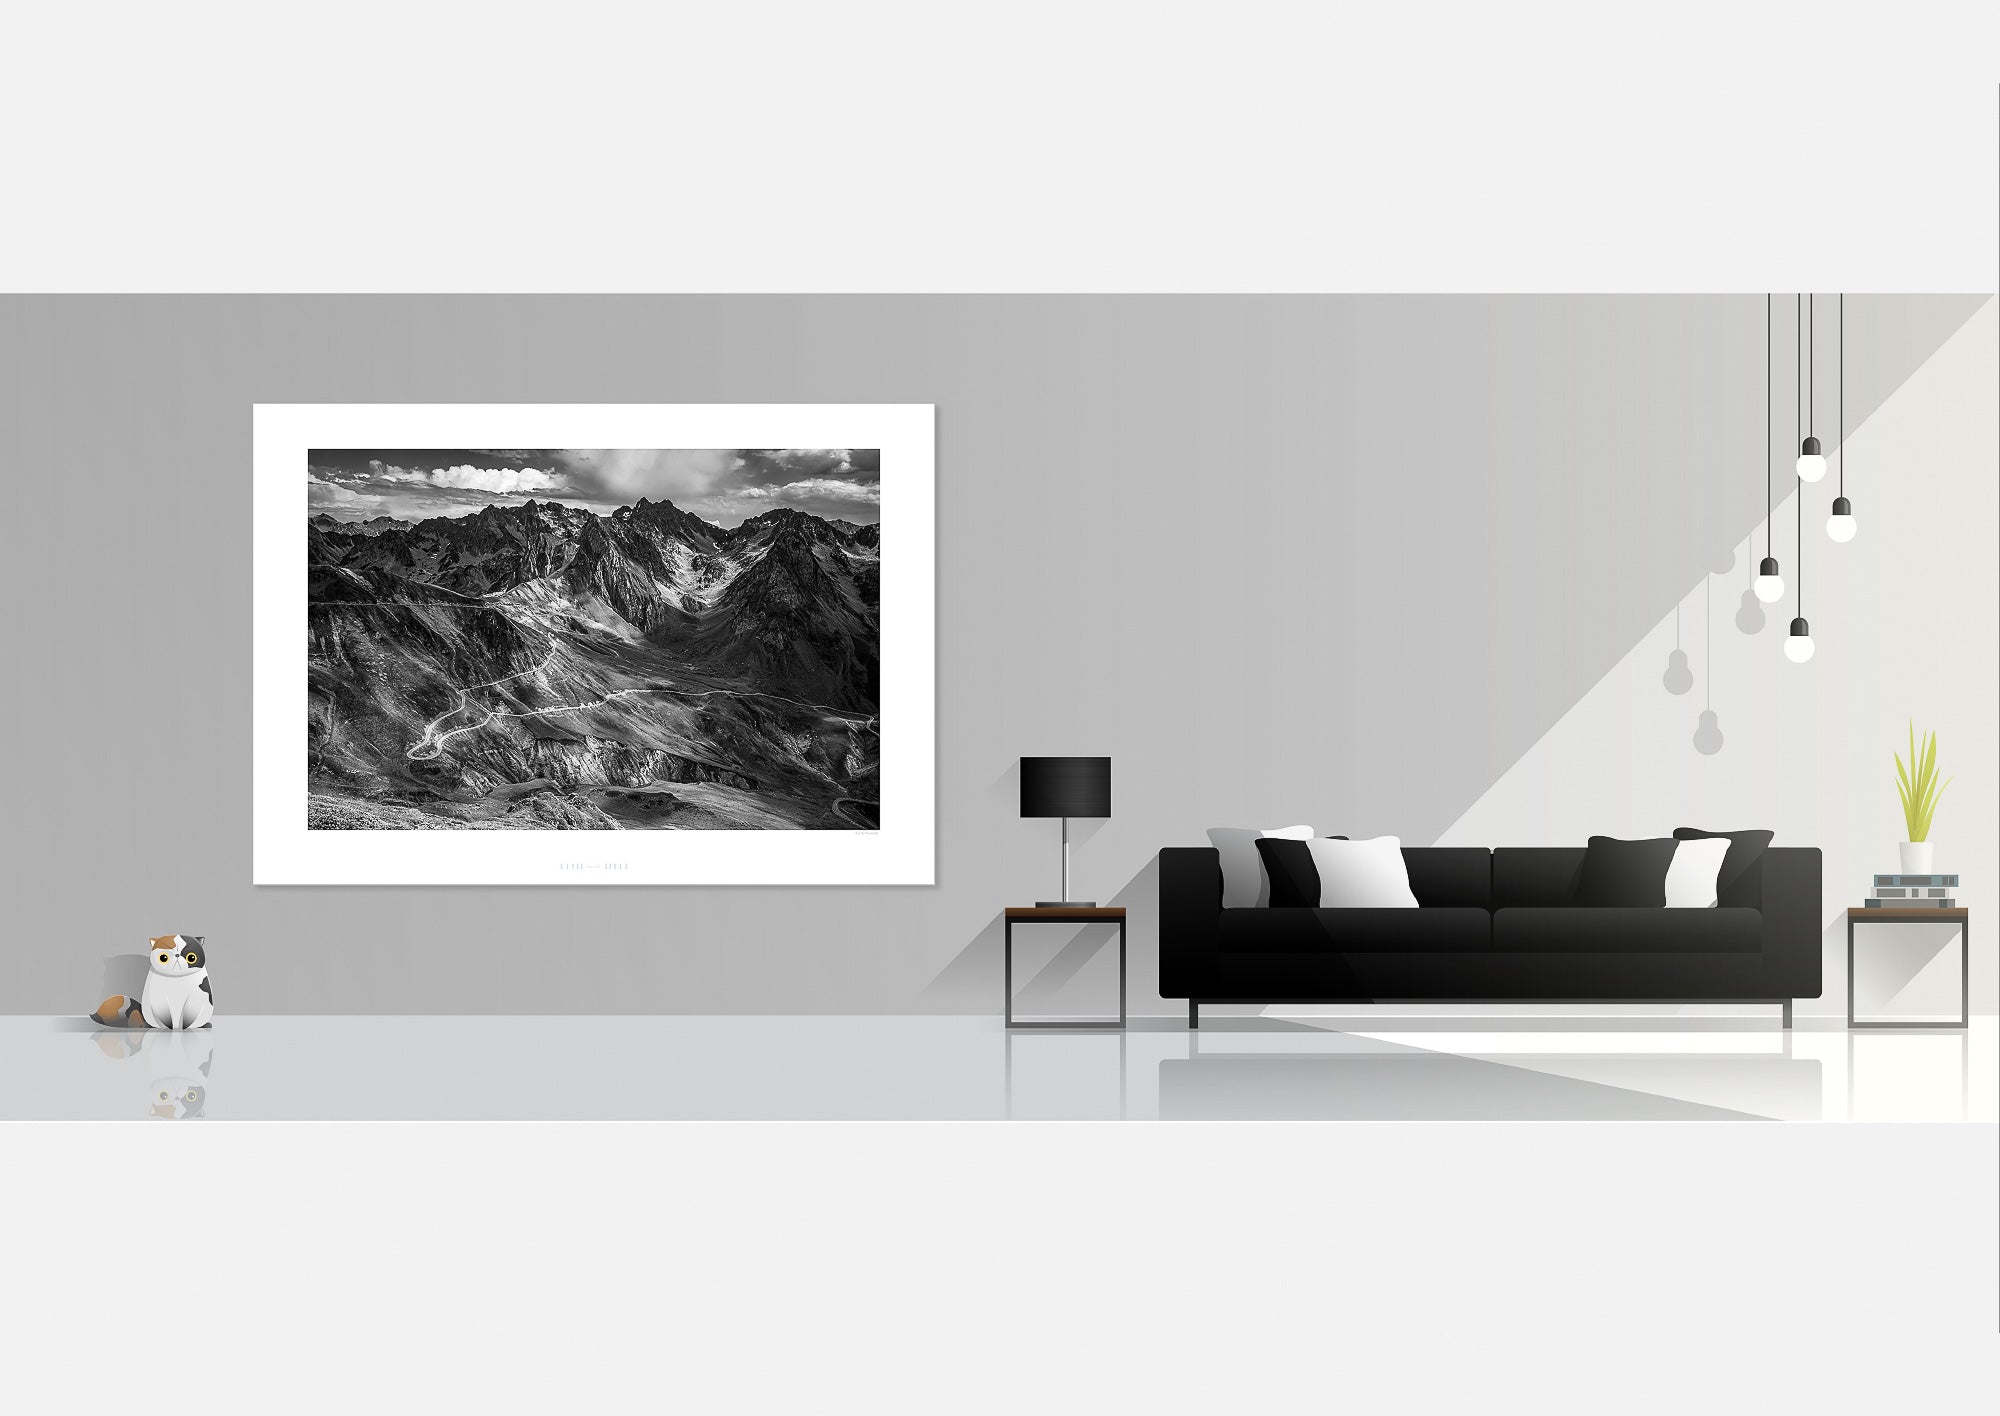 Col du Tourmalet Black and white cycling photography prints by davidt. Gifts for cyclists